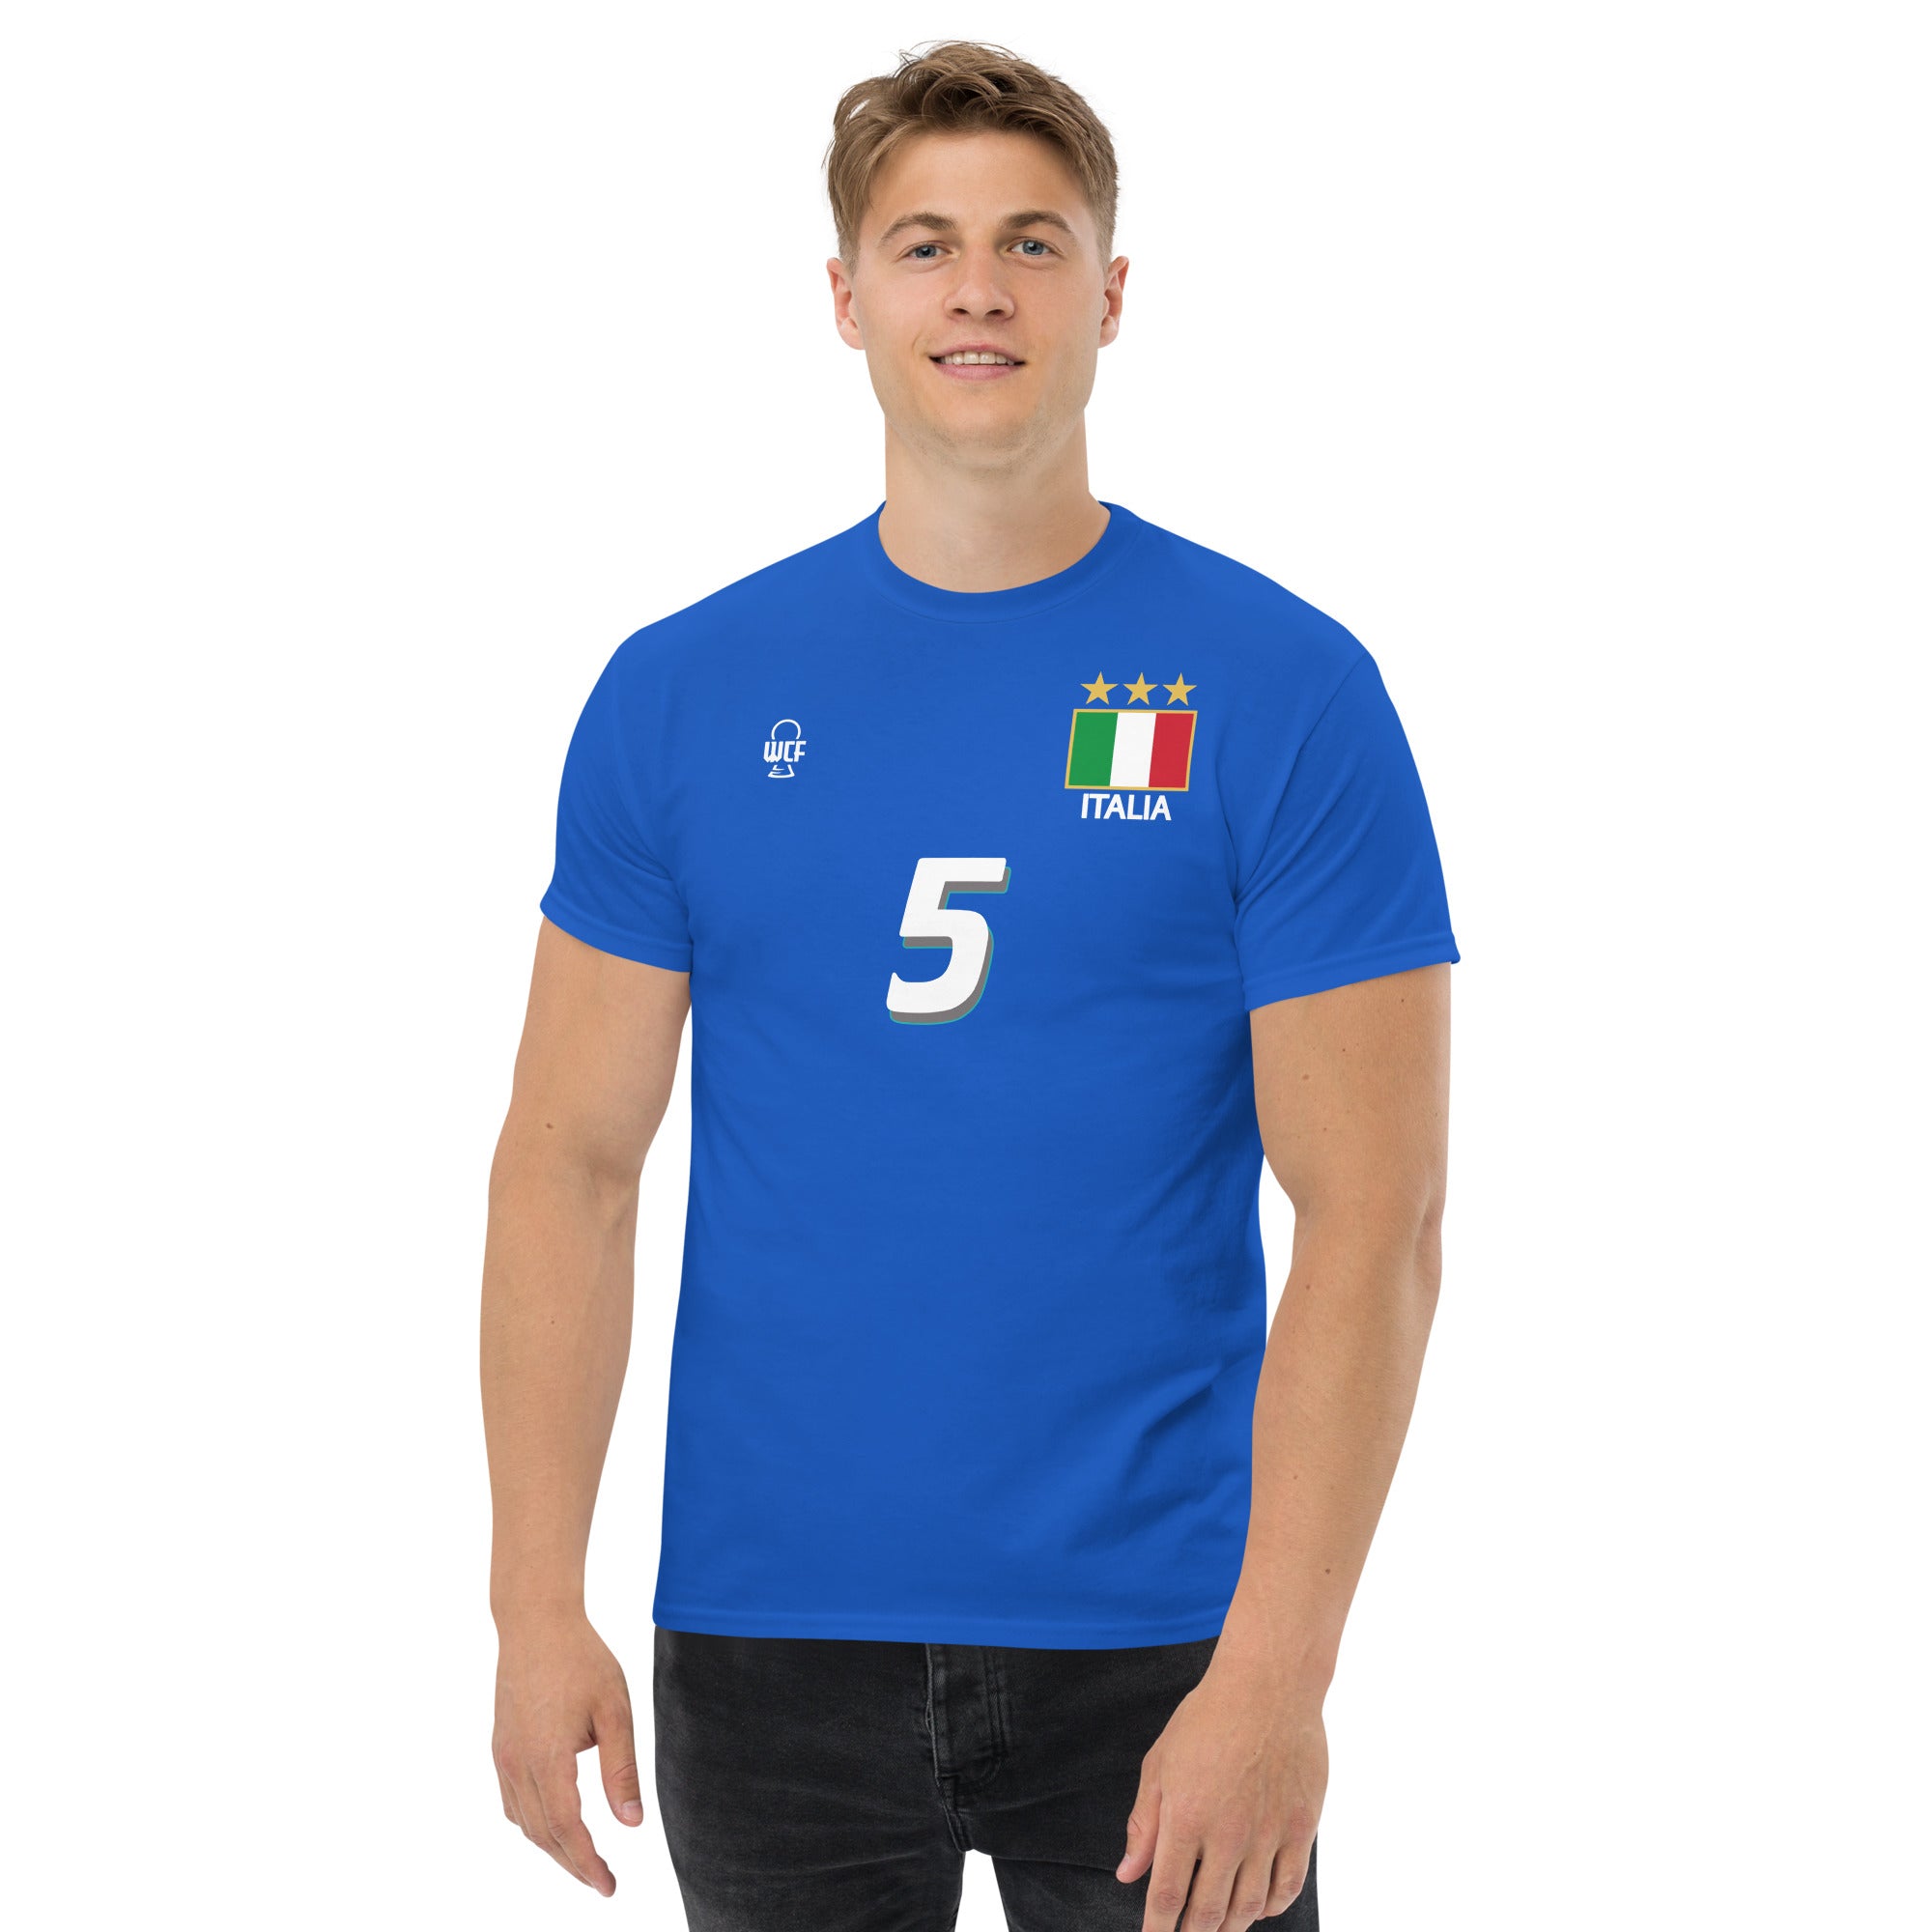 World Cup 1994 LEGENDS Classic T-Shirt - Paolo - Italy